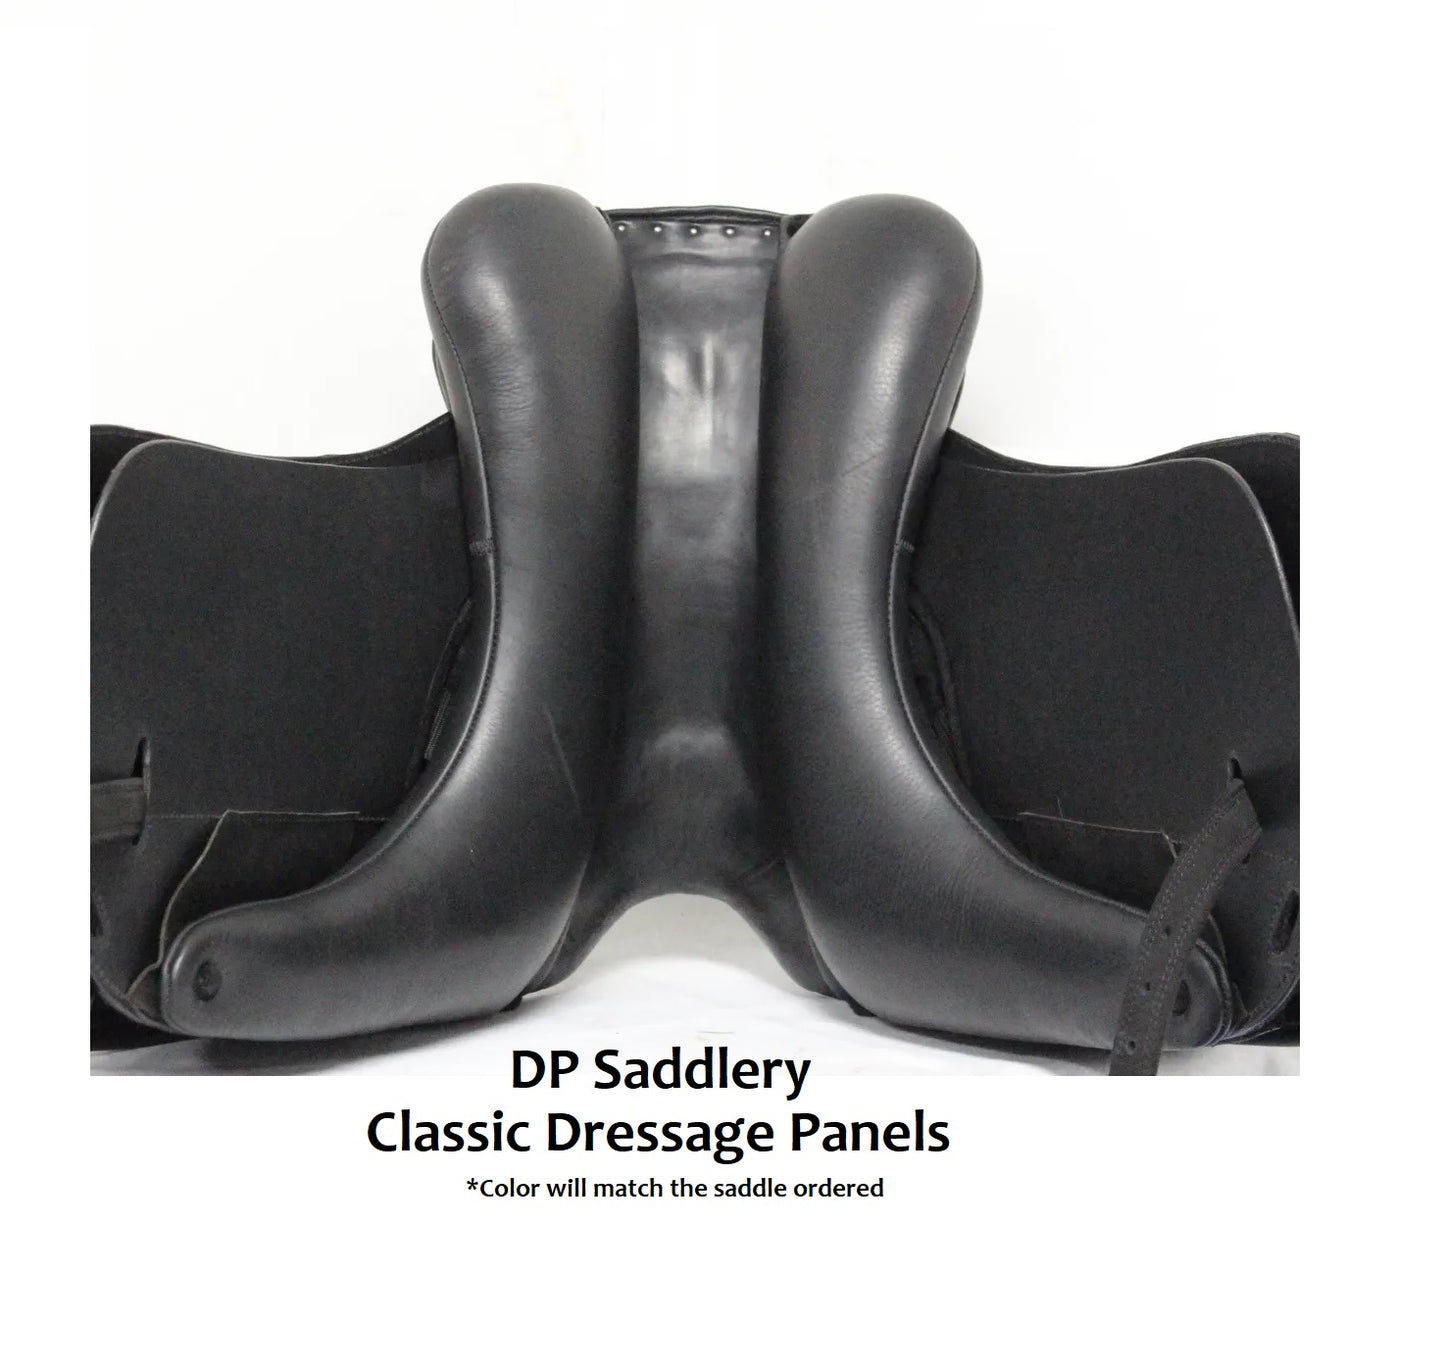 DP Saddlery Classic Dressage 5407 18 in